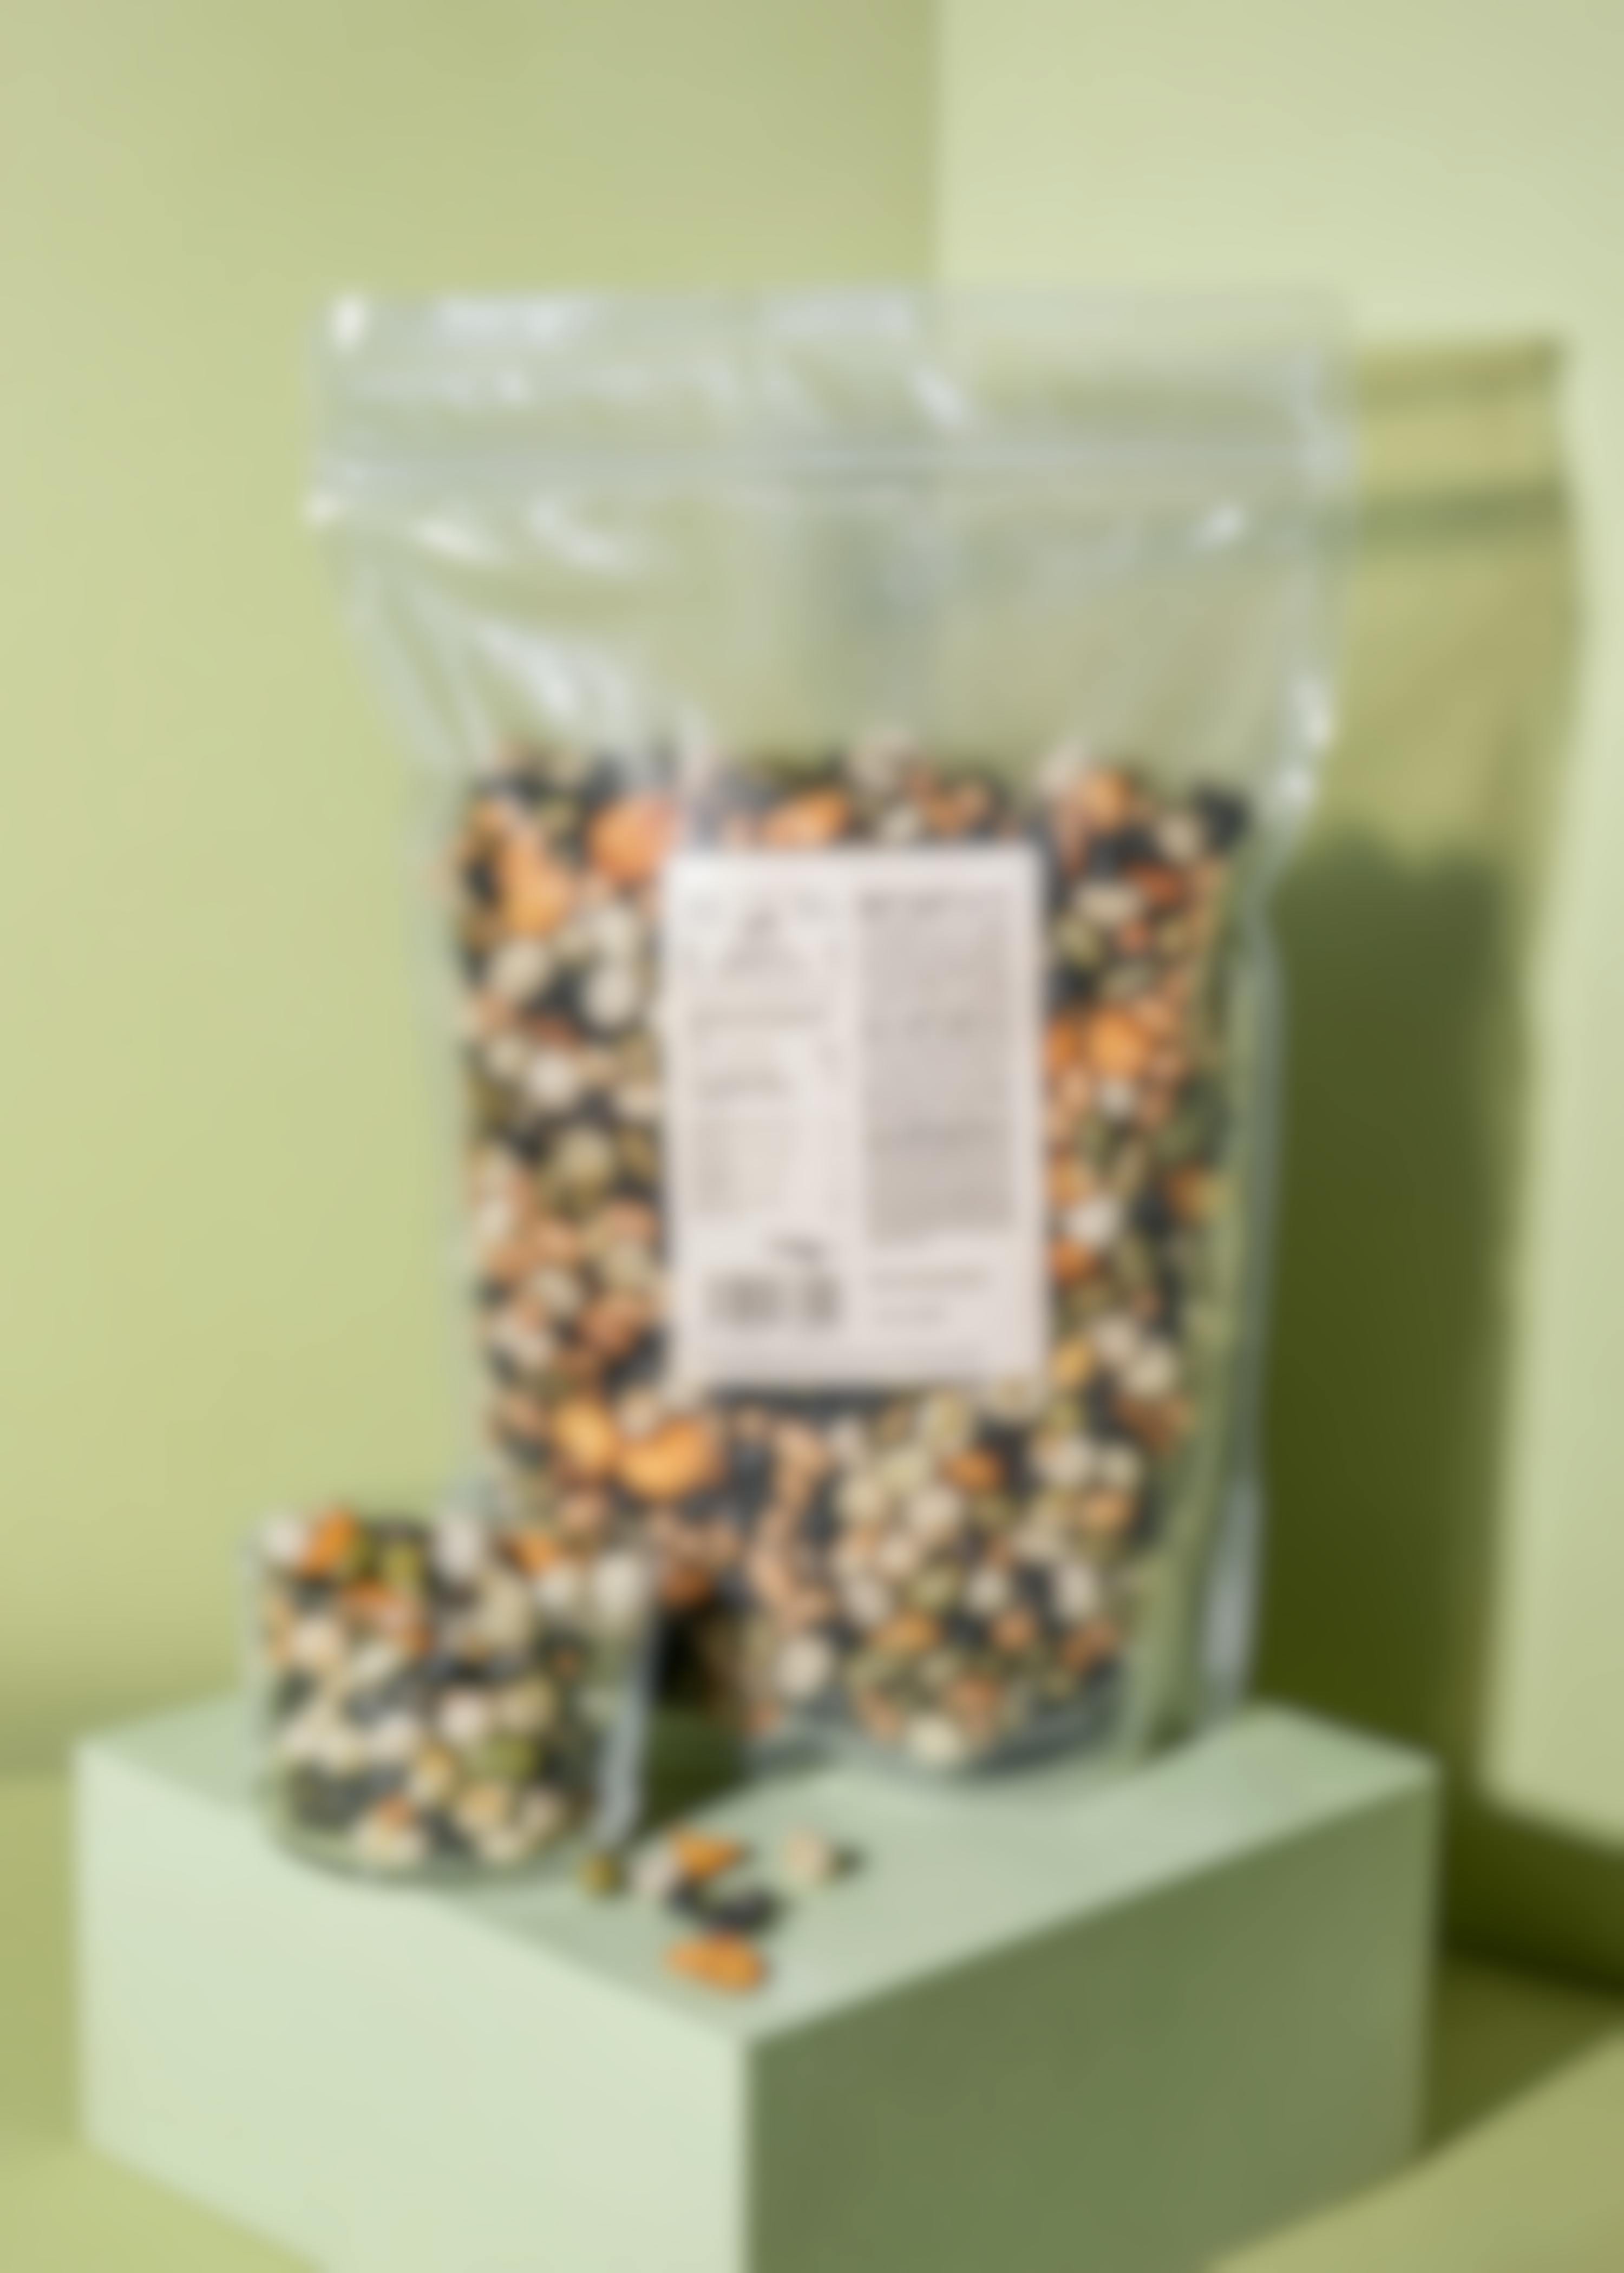 Roasted and salted bean and pea mix 1kg